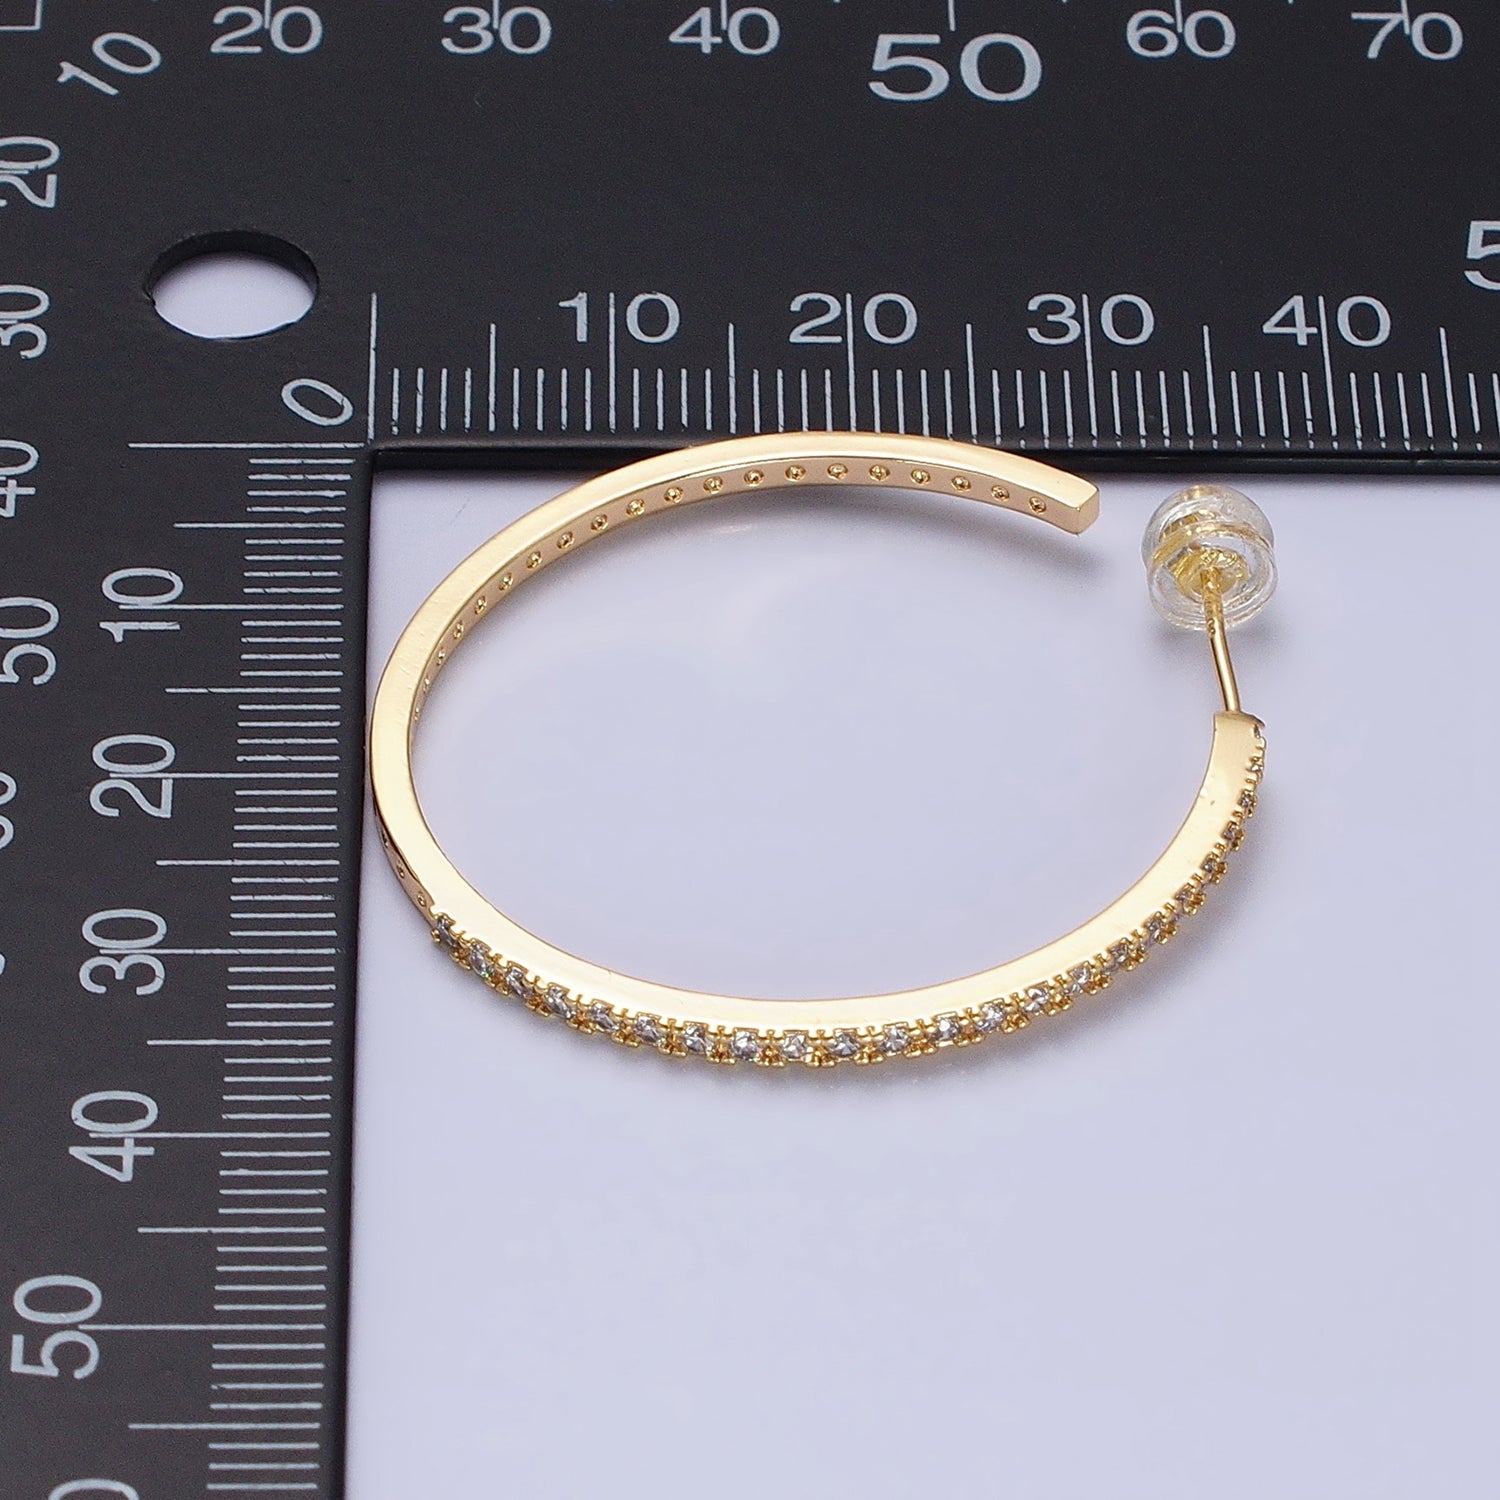 Minimalist Gold Hoop Earring with CZ Stone Simple Silver Hoop Earring for Everyday Use AB674 AB677 - DLUXCA